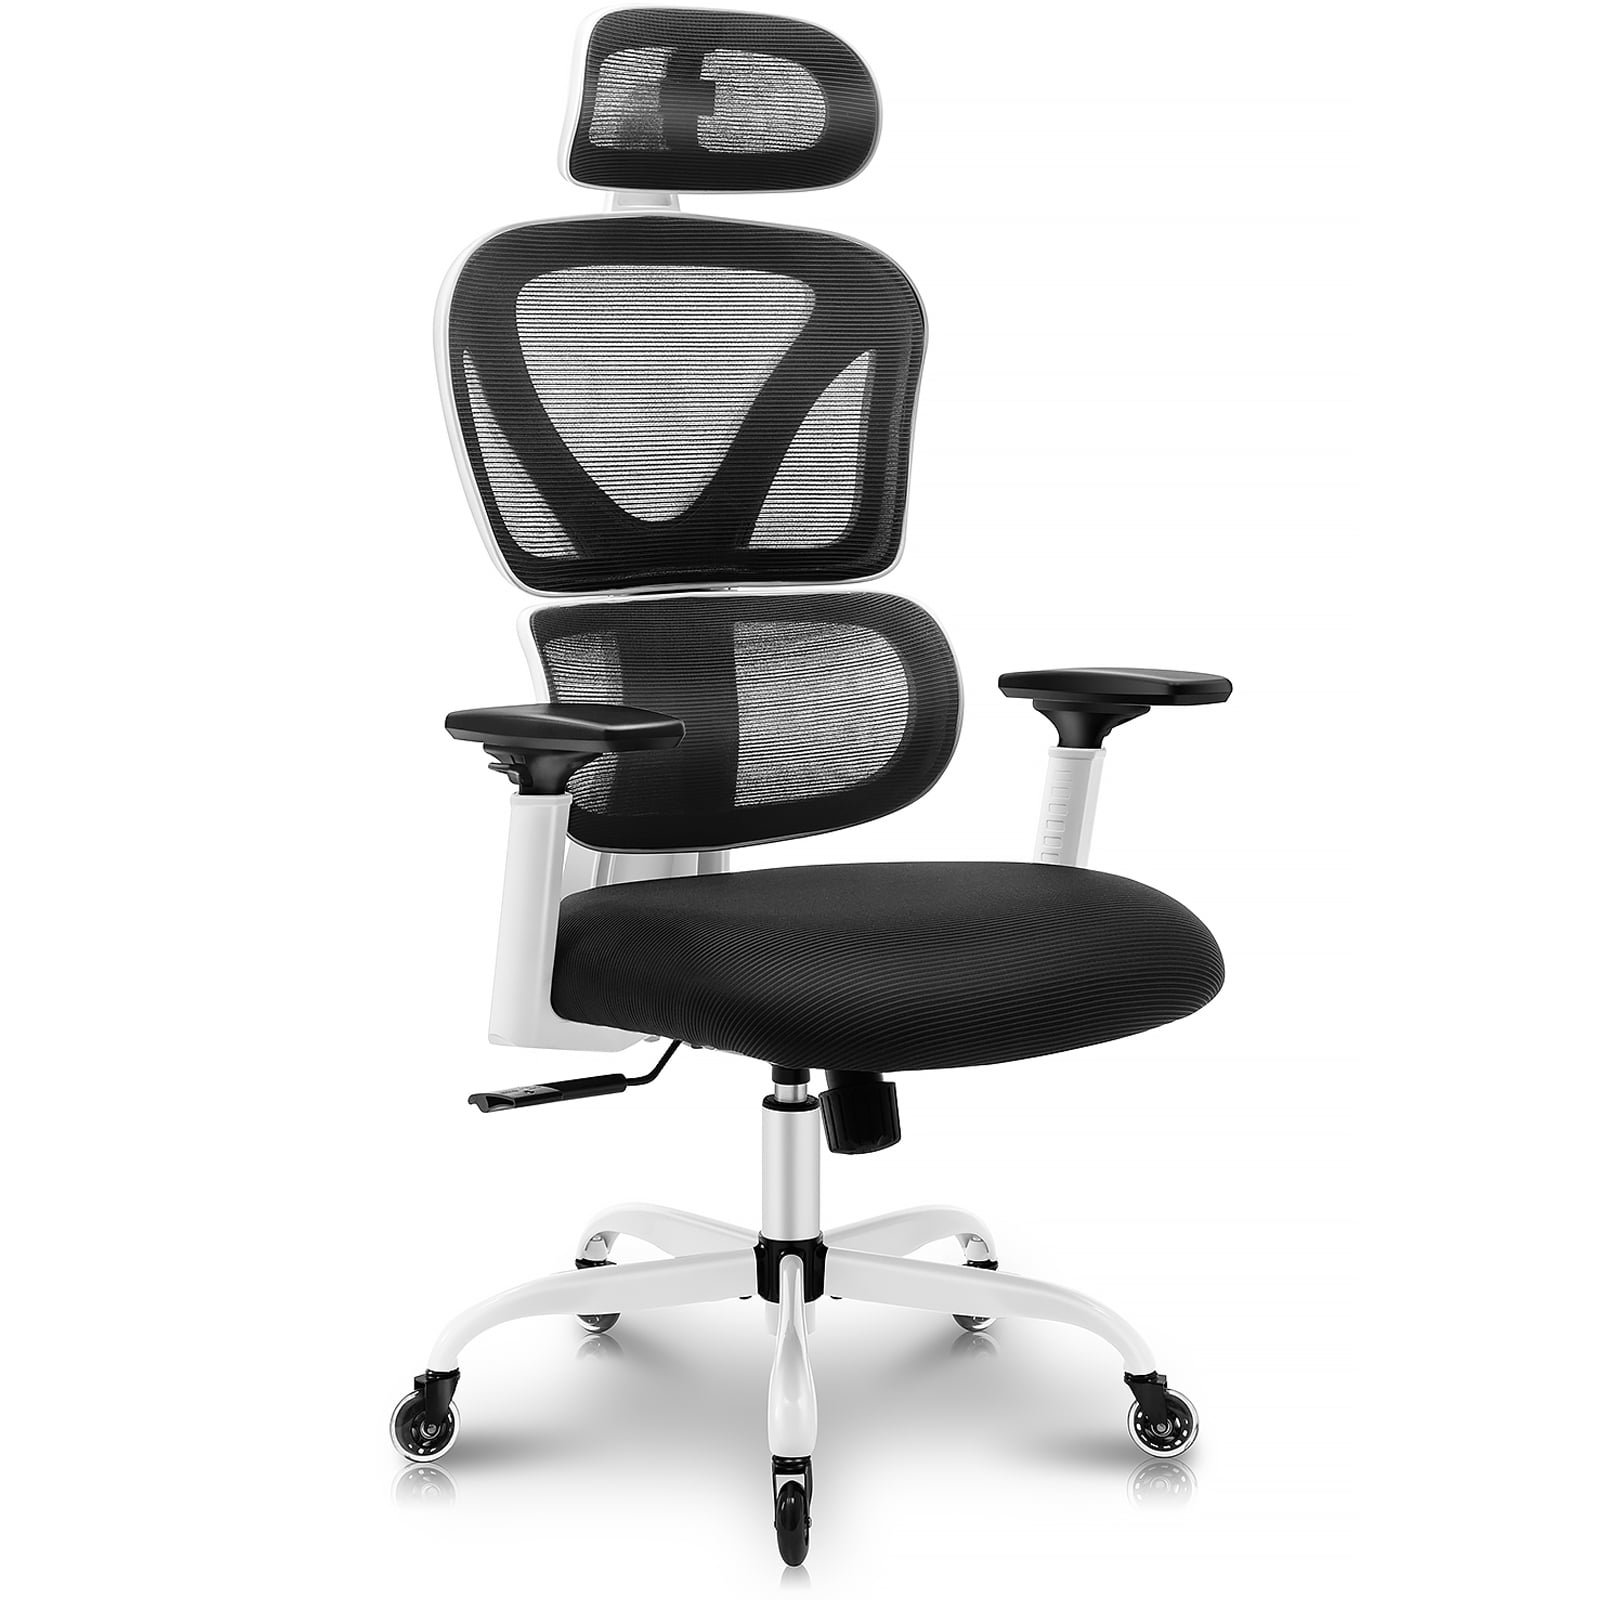 Back support for your office chair - Kamit Health